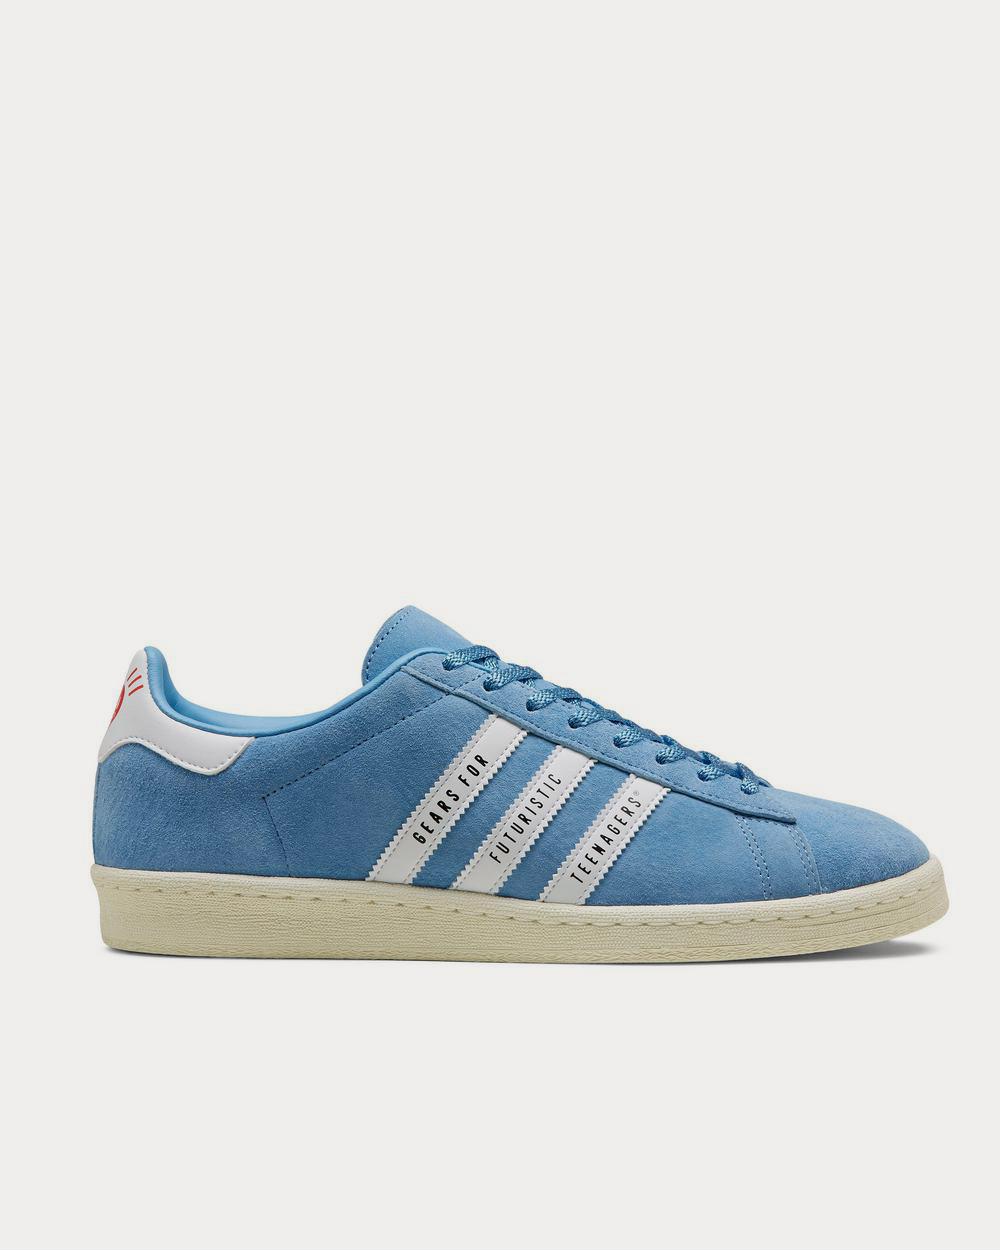 Adidas x Human Made - Campus Leather-Trimmed Suede  Blue low top sneakers